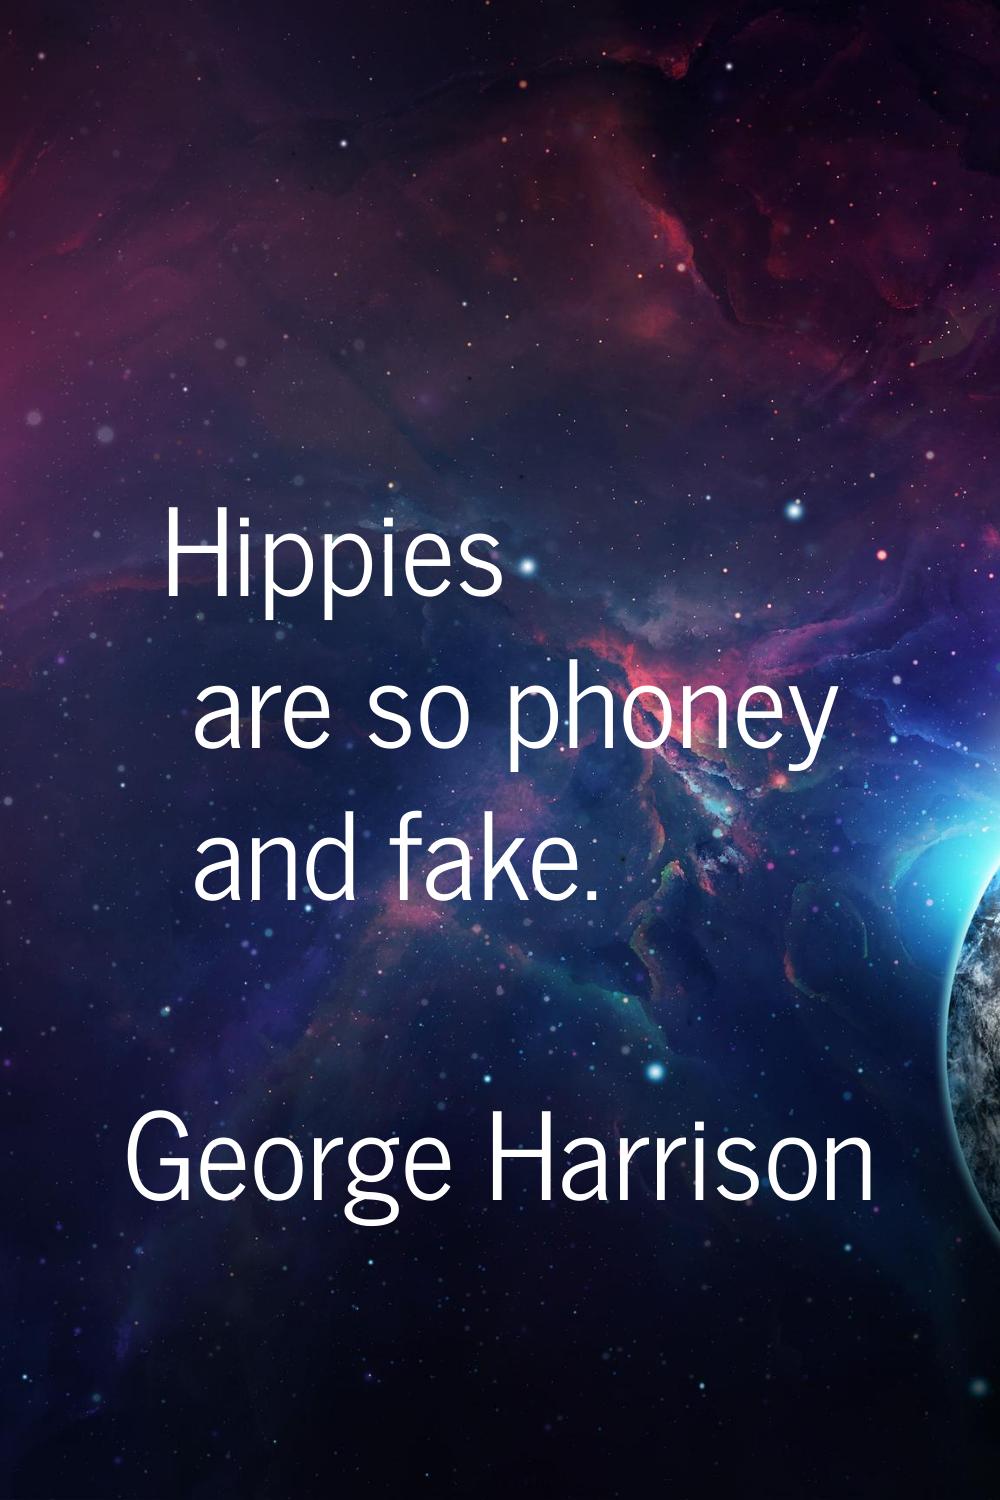 Hippies are so phoney and fake.